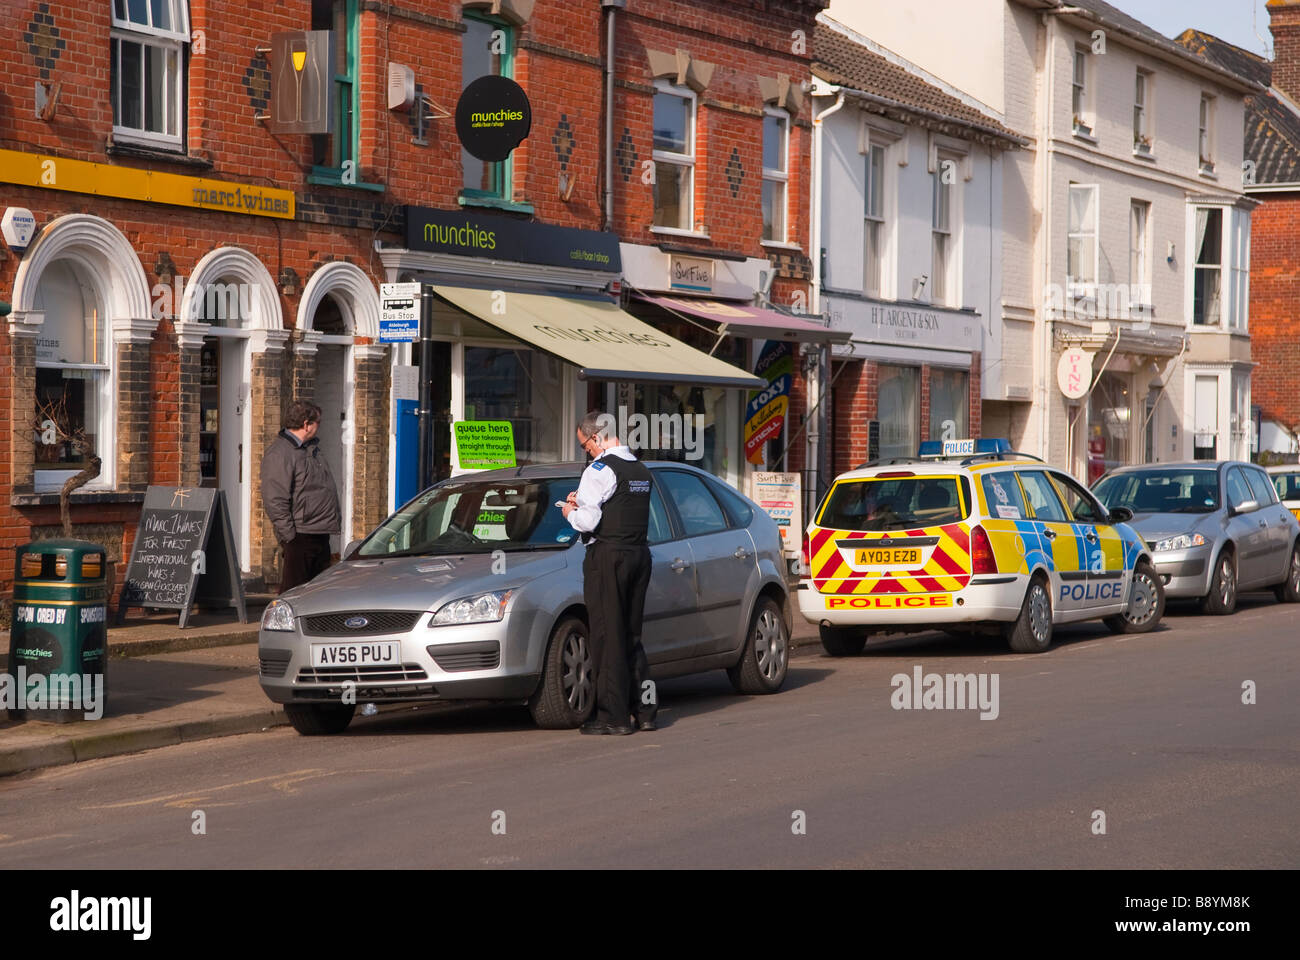 A police community support officer cso issuing a parking ticket on an illegally parked car in the uk Stock Photo